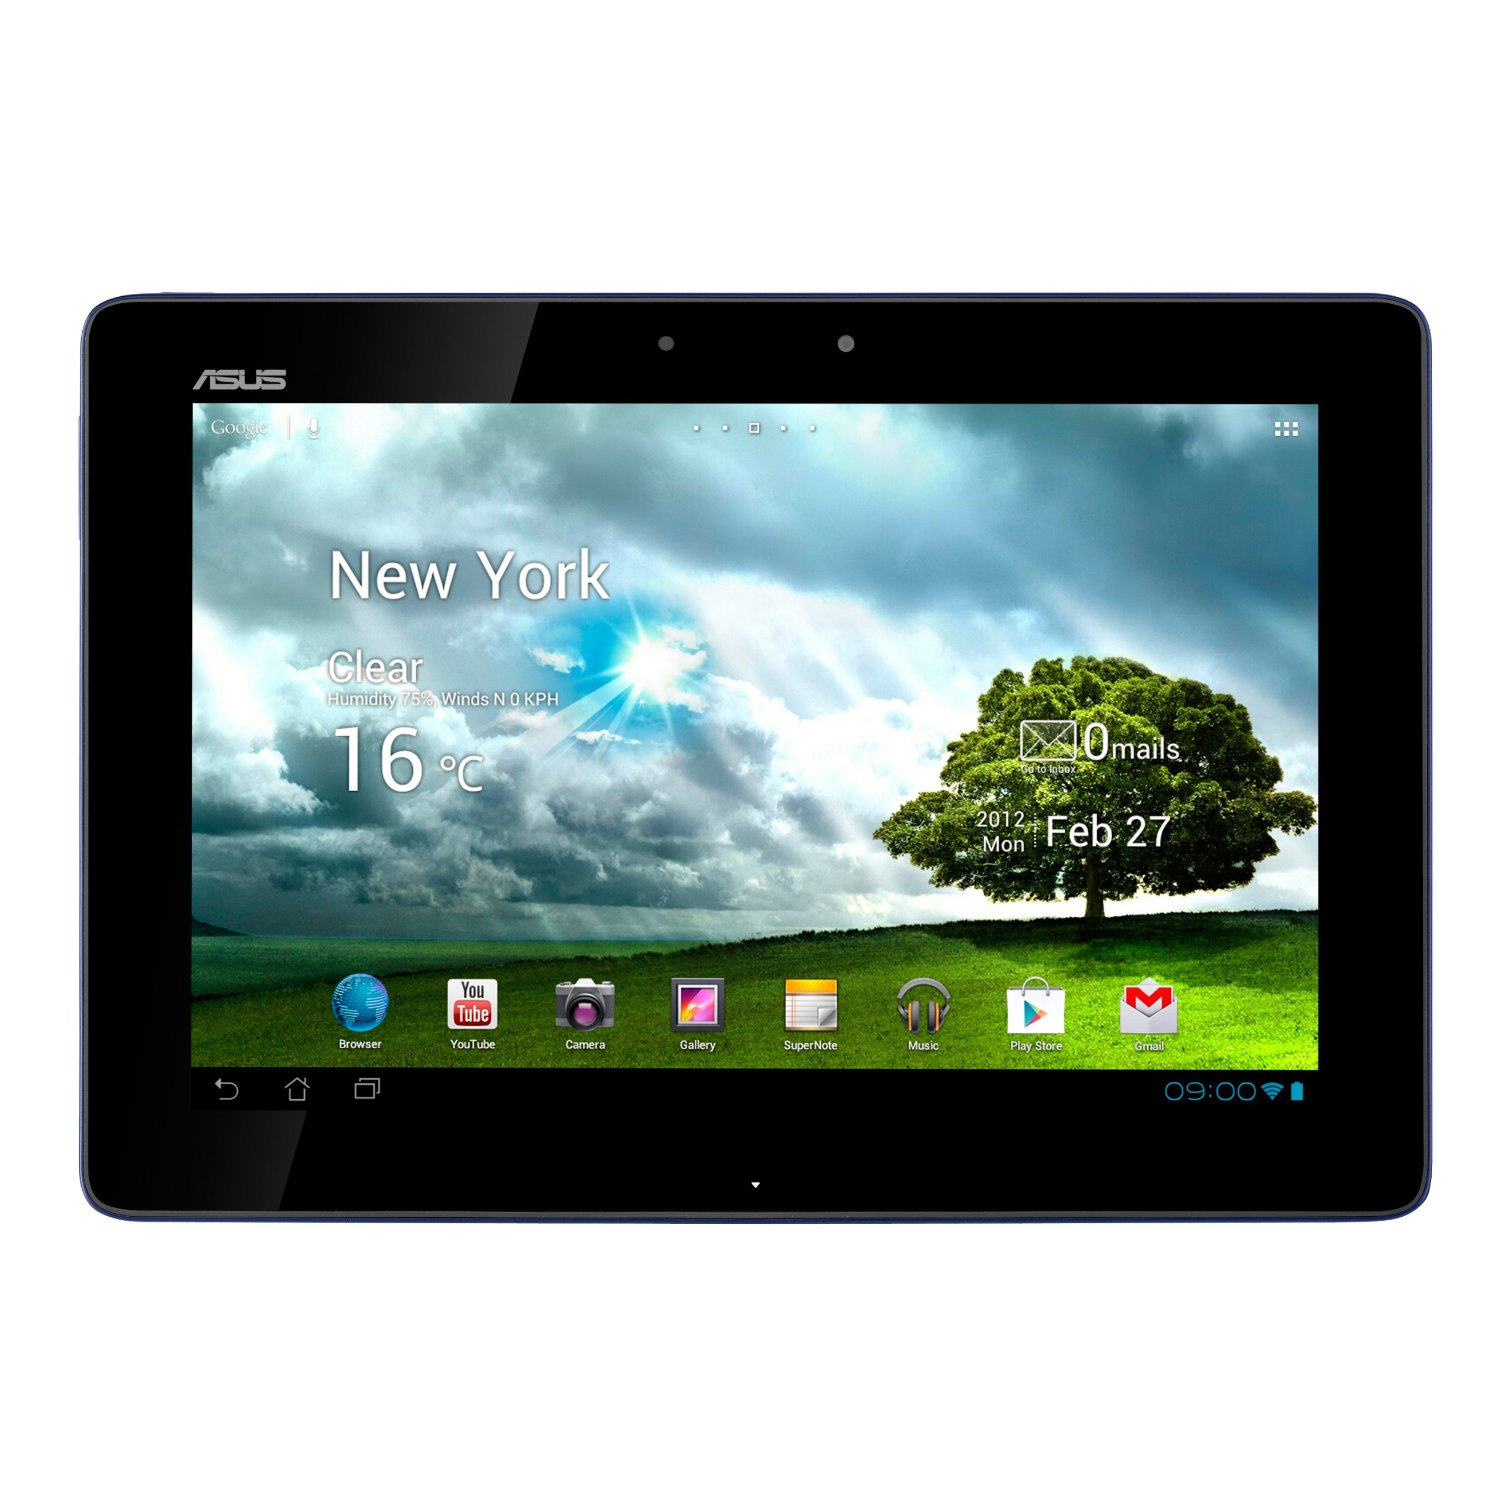 http://thetechjournal.com/wp-content/uploads/images/1205/1336496461-asus-transformer-tf300-tb1bl-101inch-tablet-2.jpg